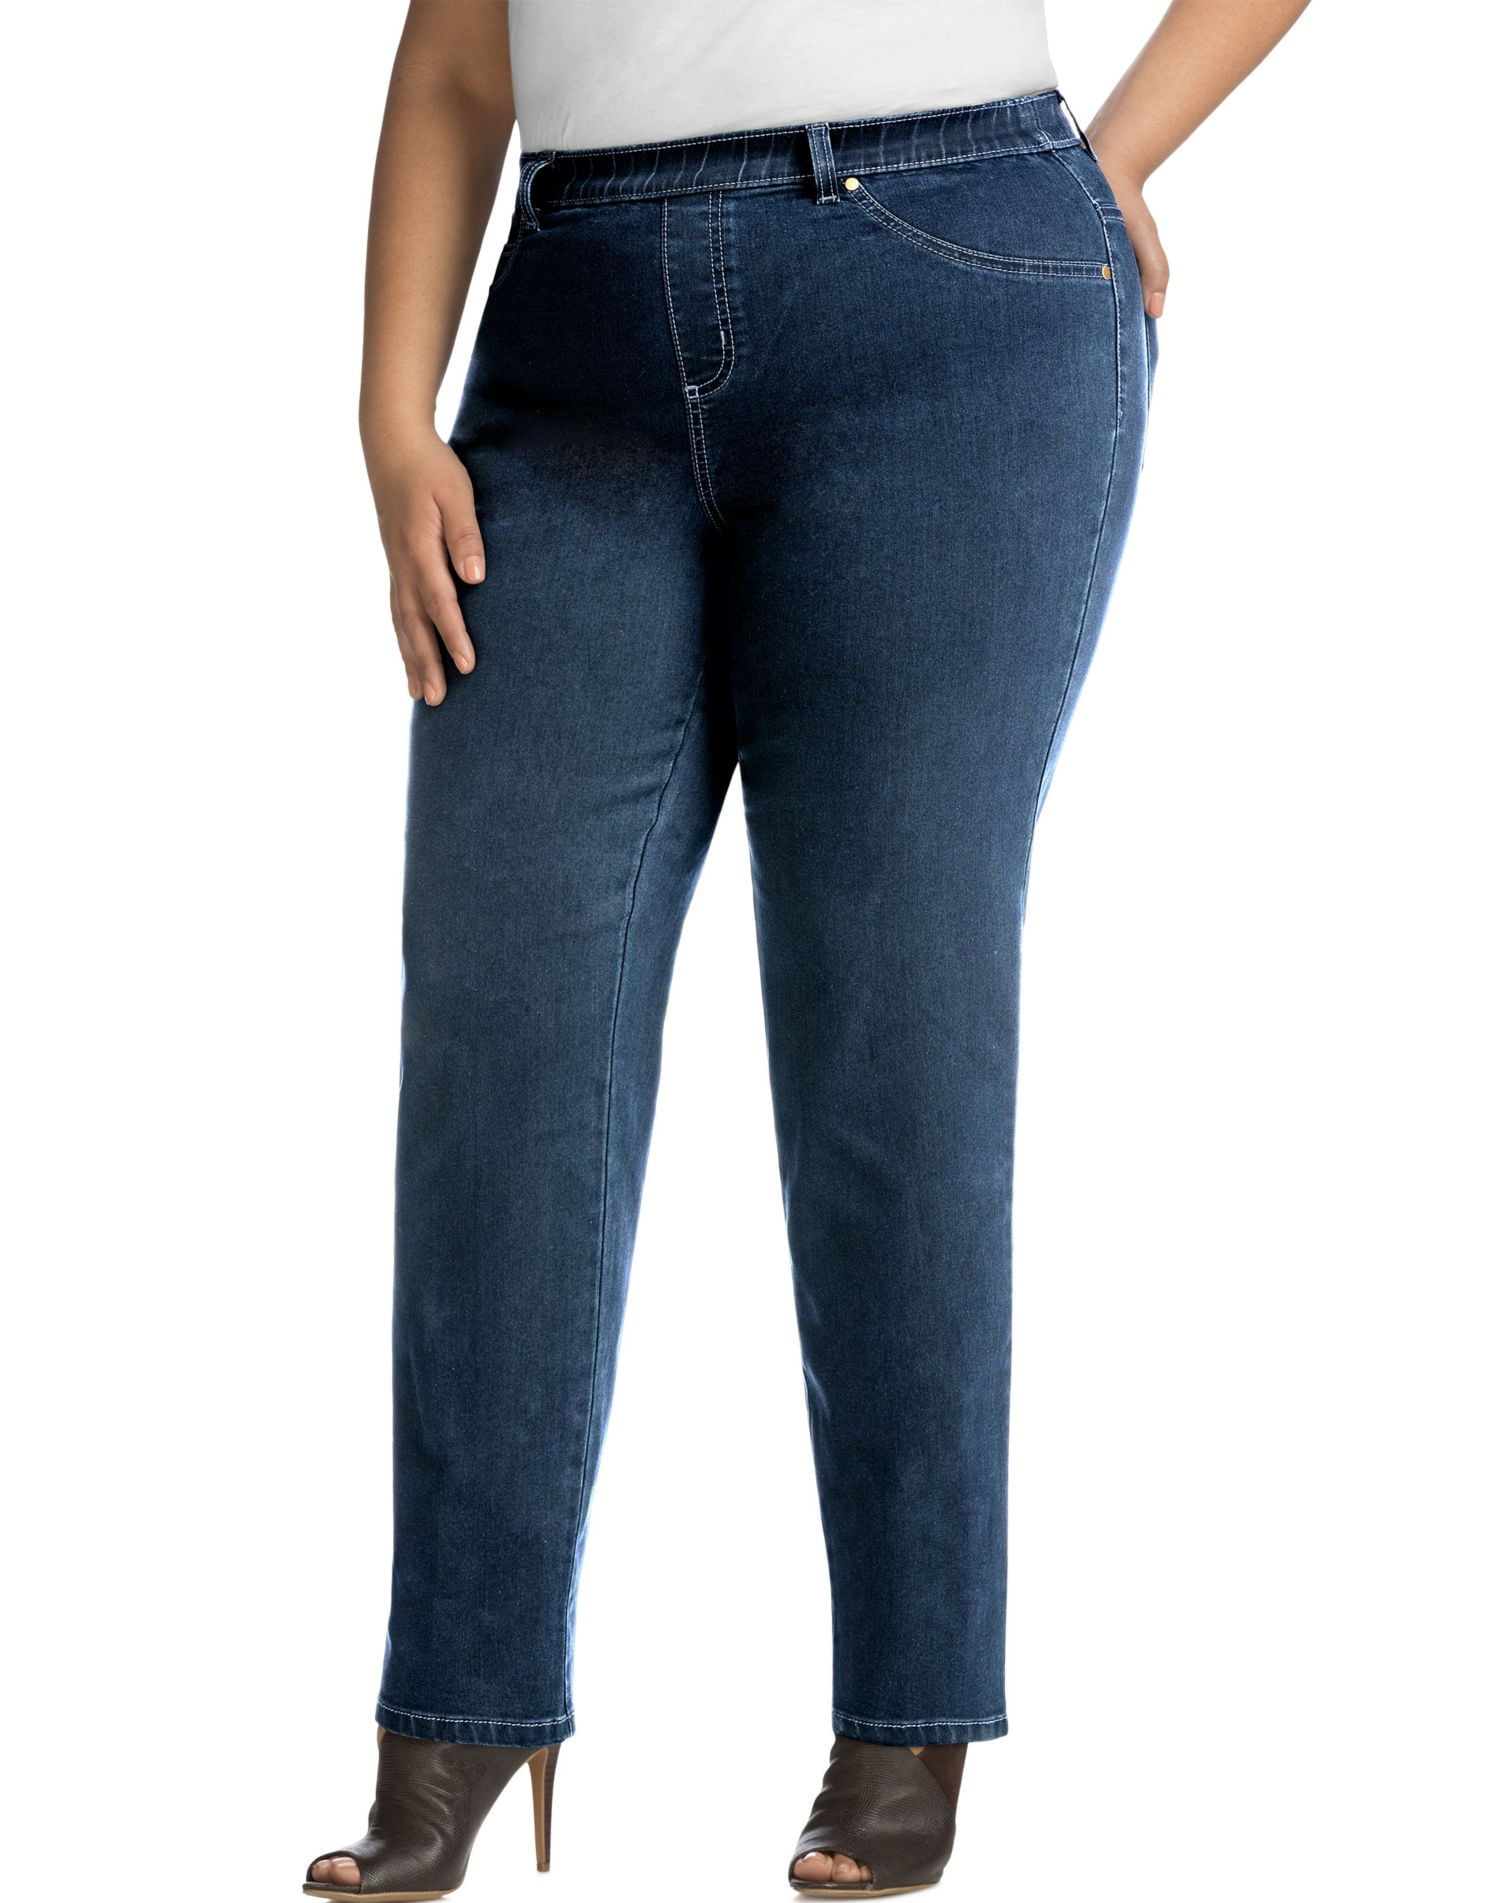 just my size elastic waist jeans